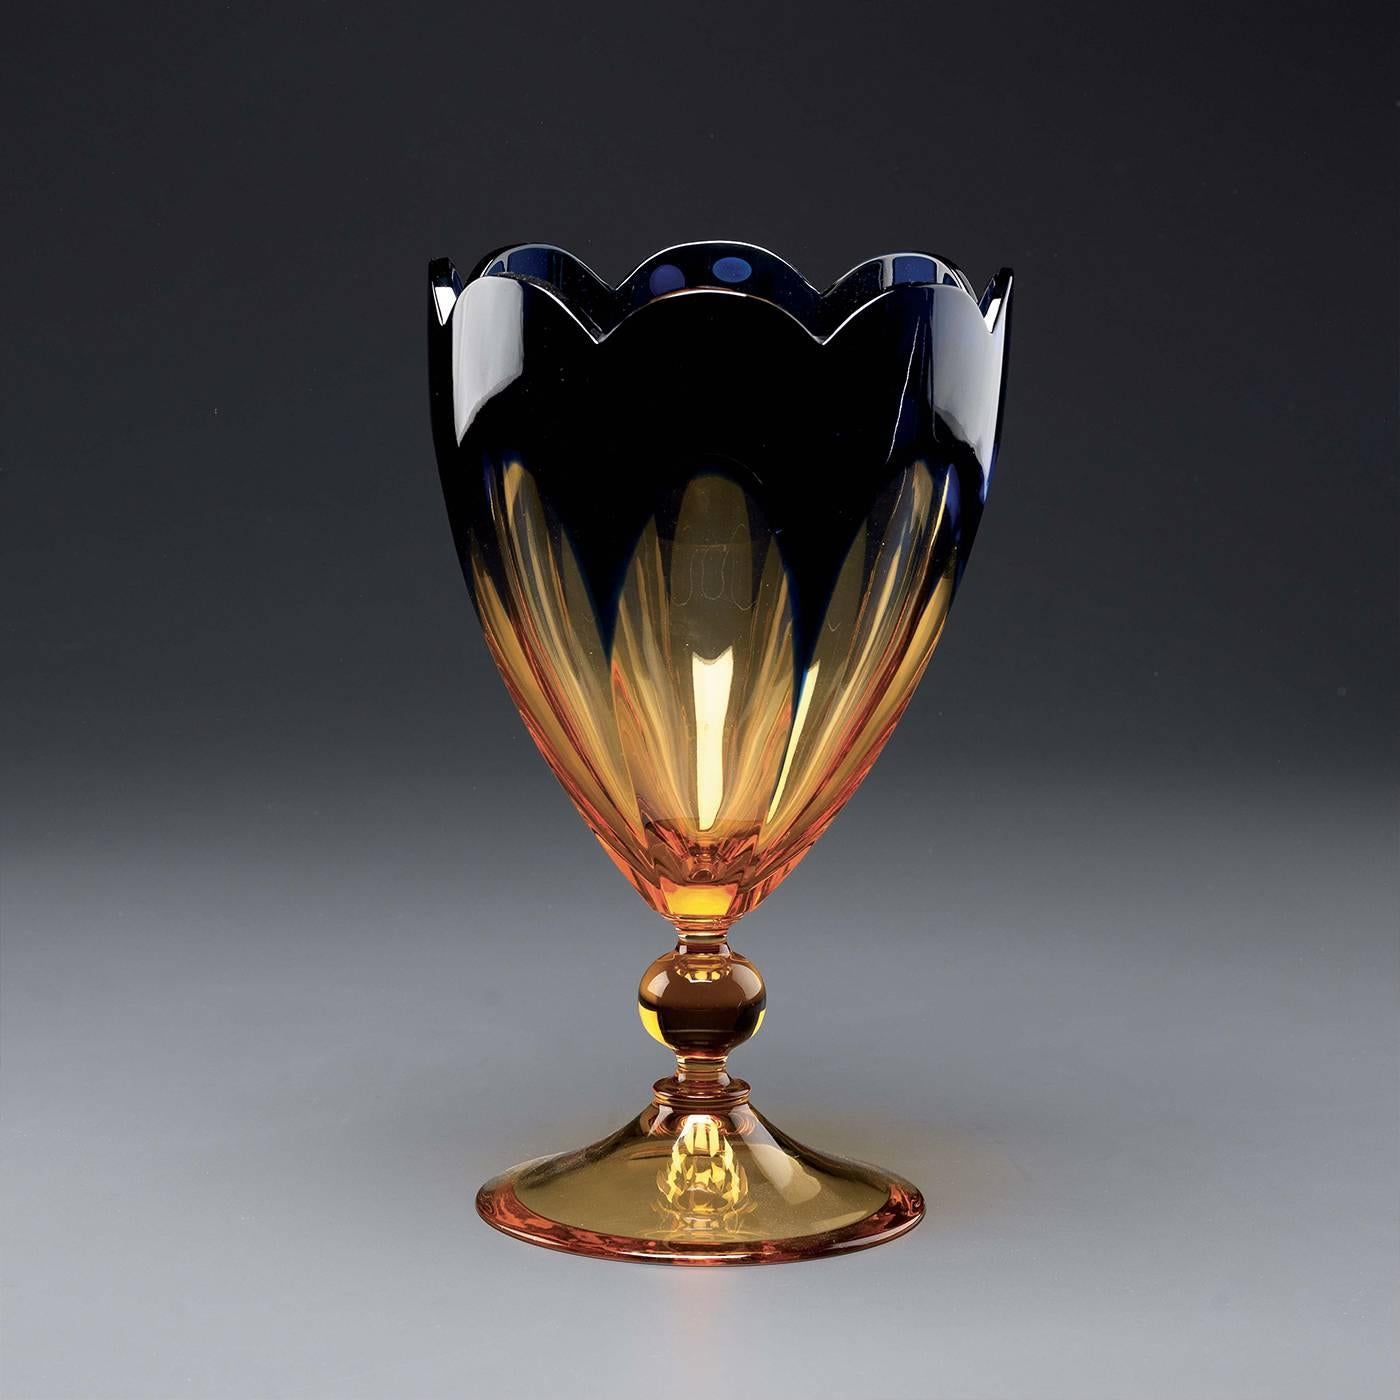 This piece captures the essence of timeless elegance. Entirely handcrafted of blown crystal this vase showcases the craftsmanship of Nuova Cev's master artisans. Layers of pristine clear, blue and amber glass create the incamiciato glass, whose